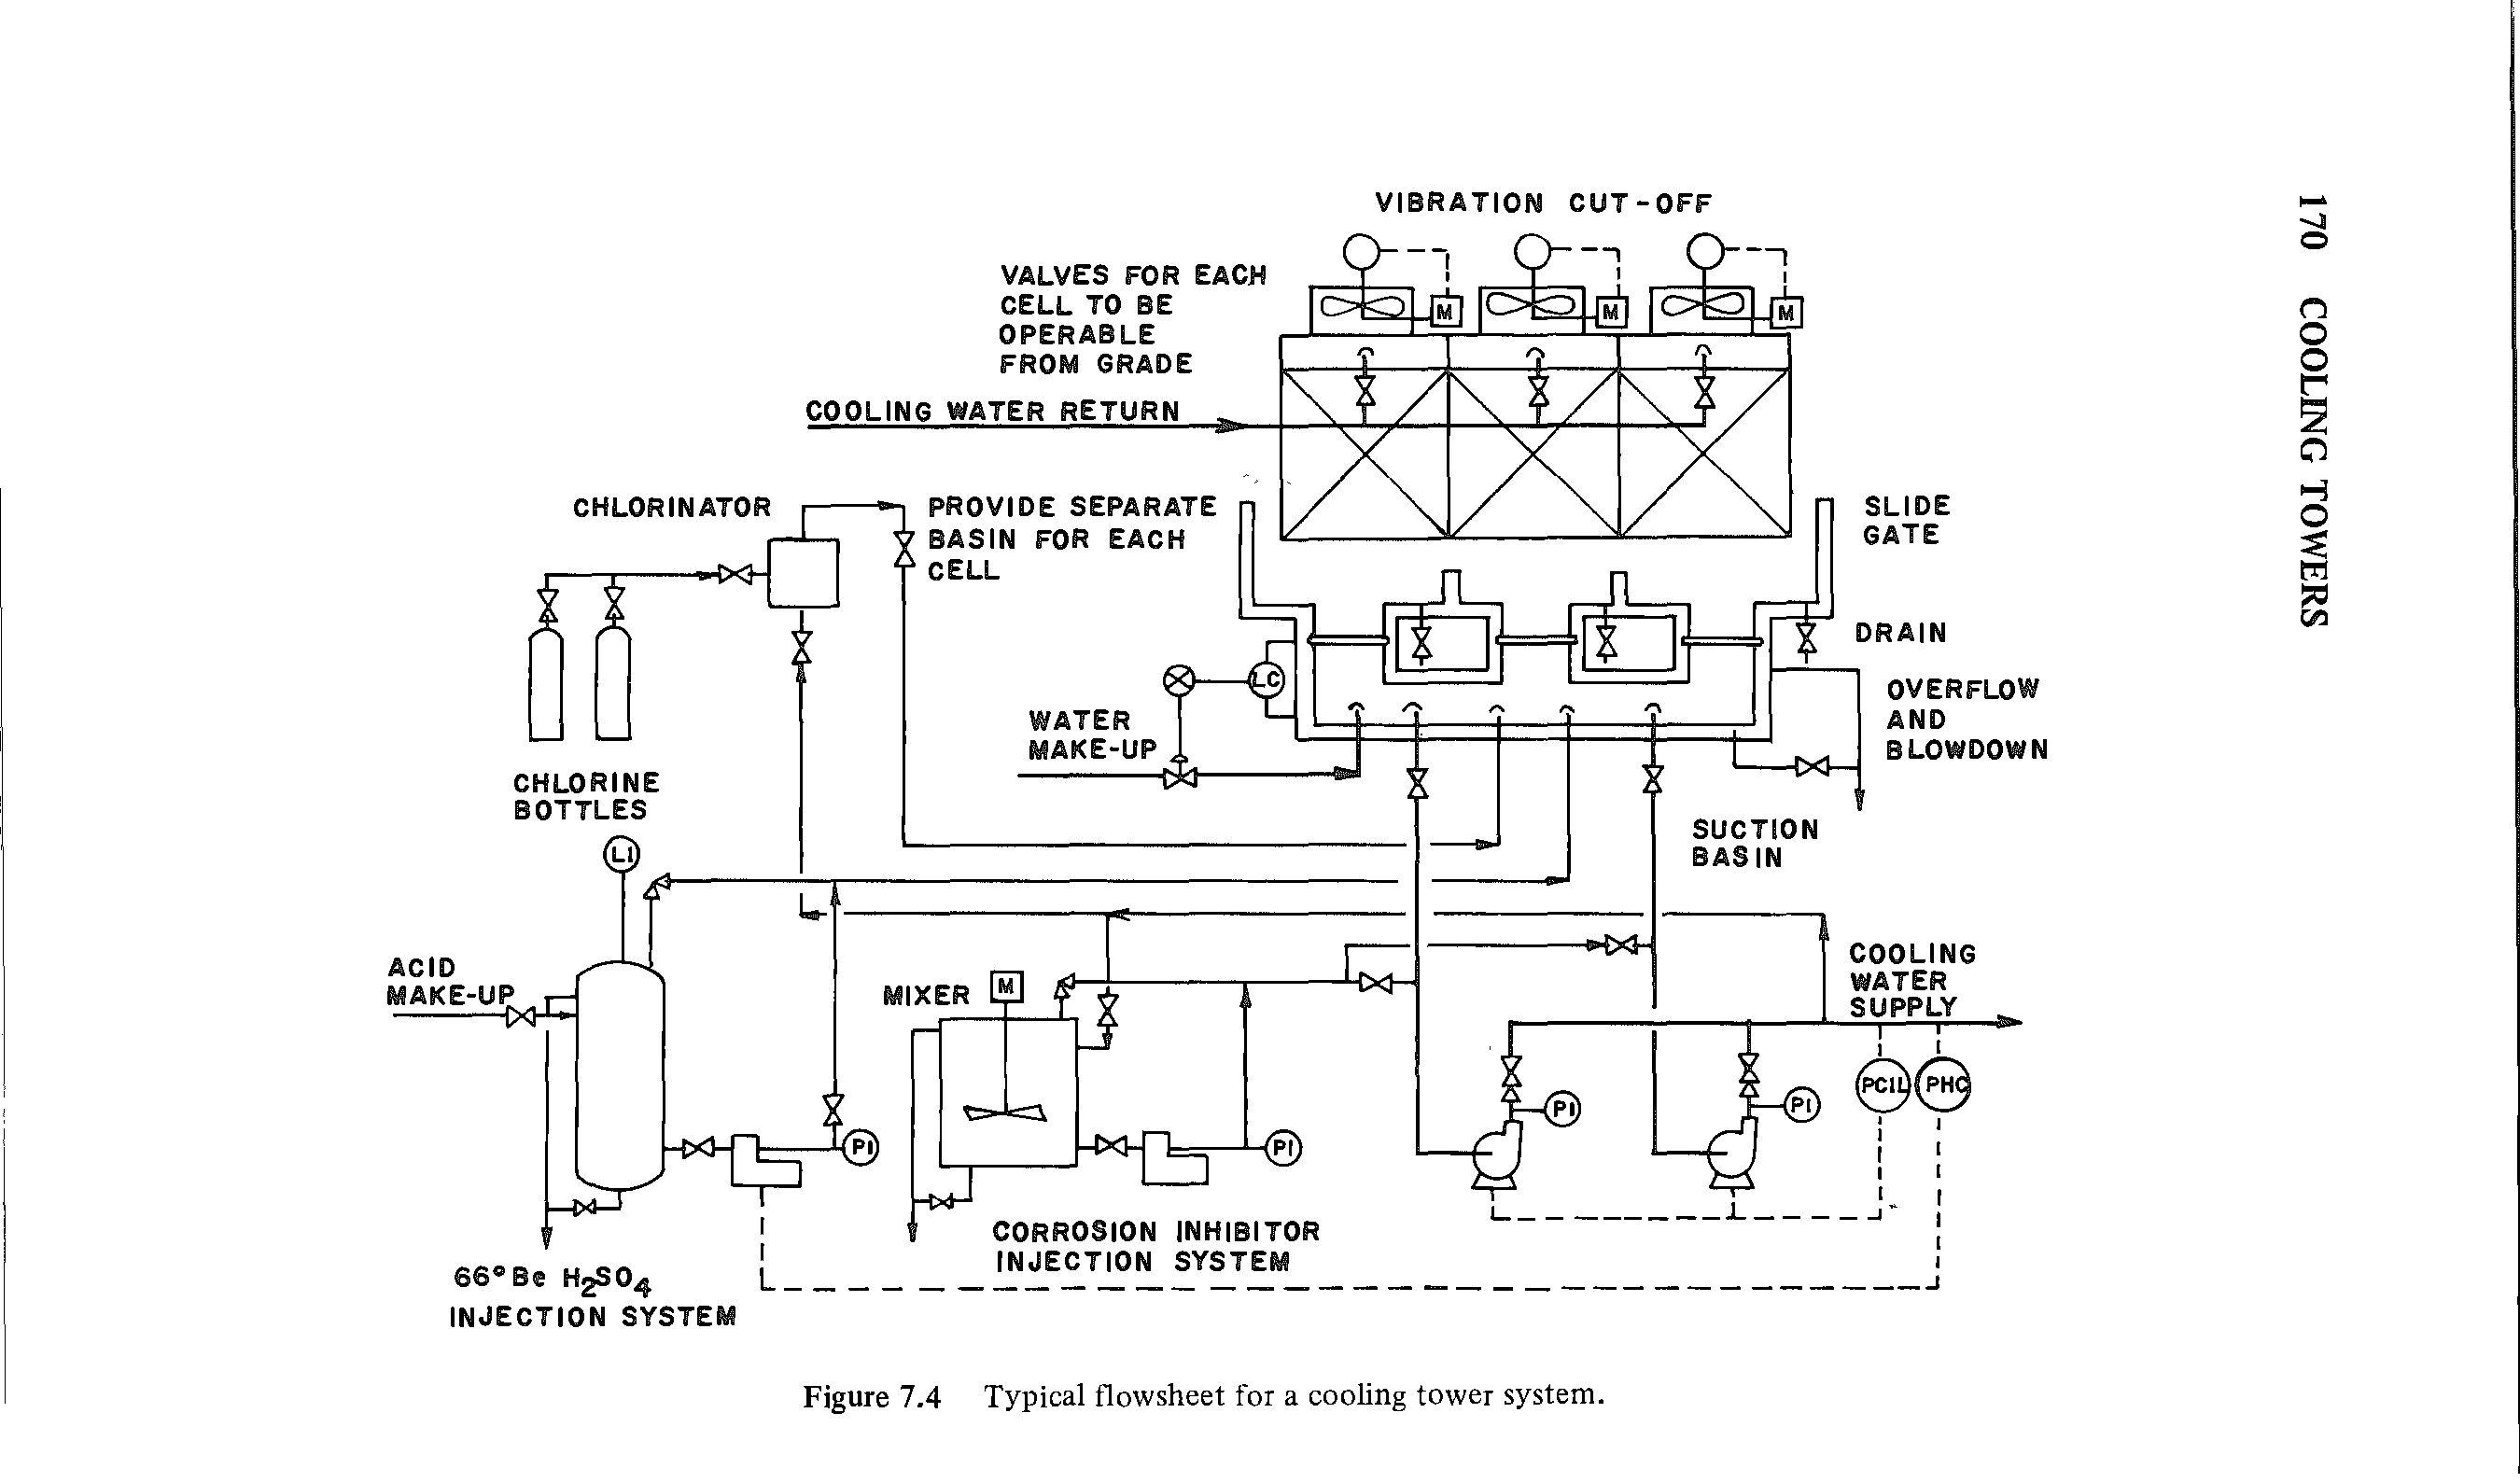 Figure 7.4 Typical flowsheet for a cooling tower system.